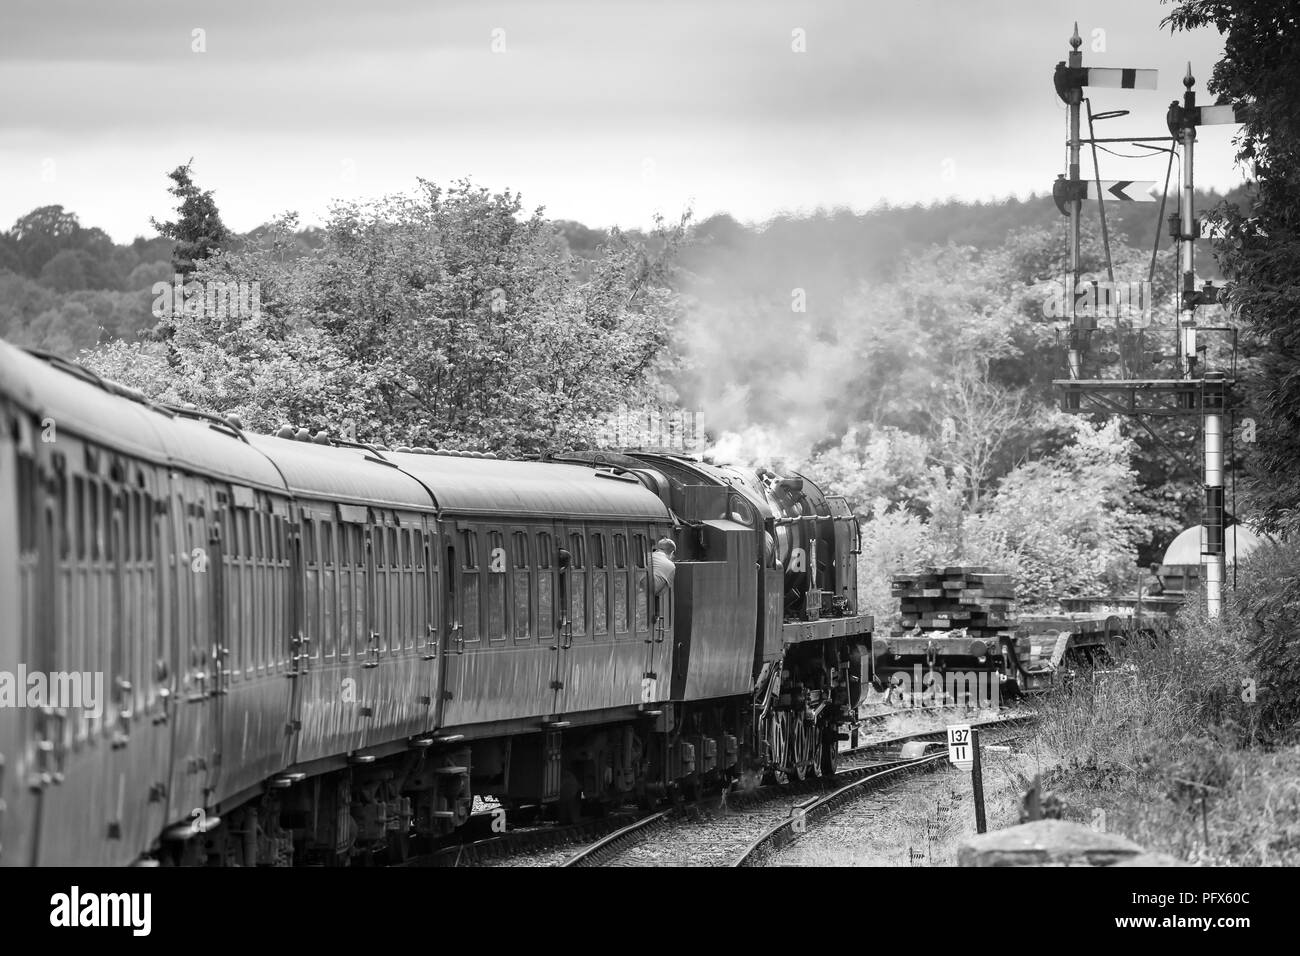 Black & white side view of vintage UK steam train pulling carriages travelling on track past railway signals, Severn Valley Railway heritage line. Stock Photo